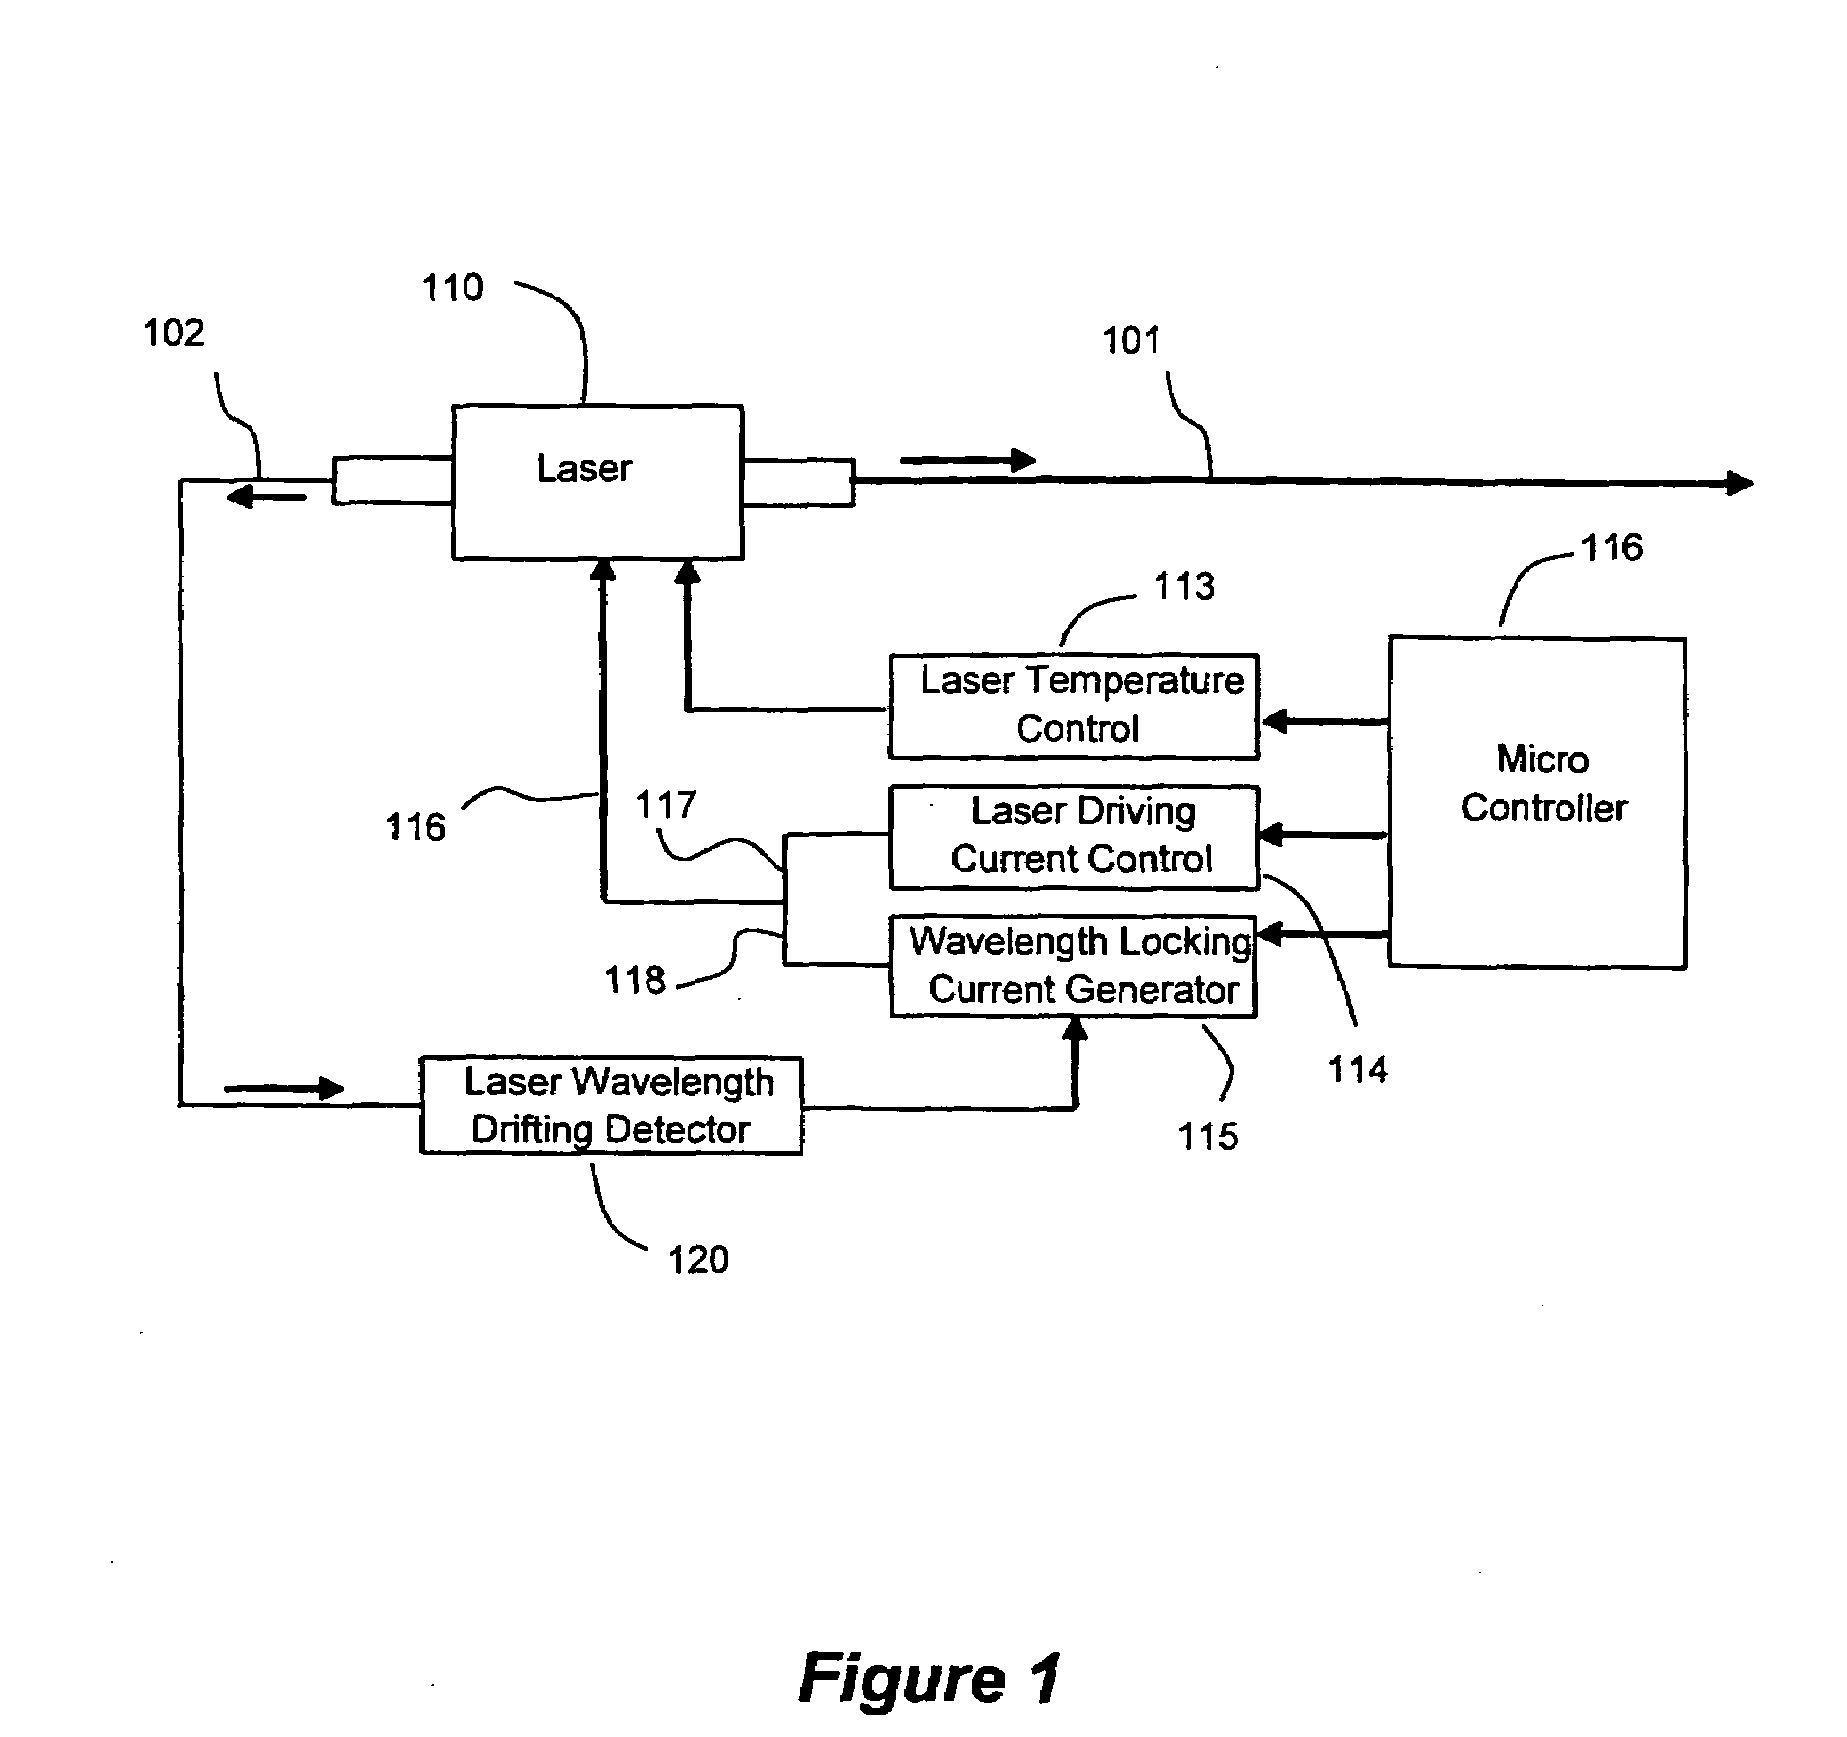 Method and Device for Reducing Laser Phase Noise